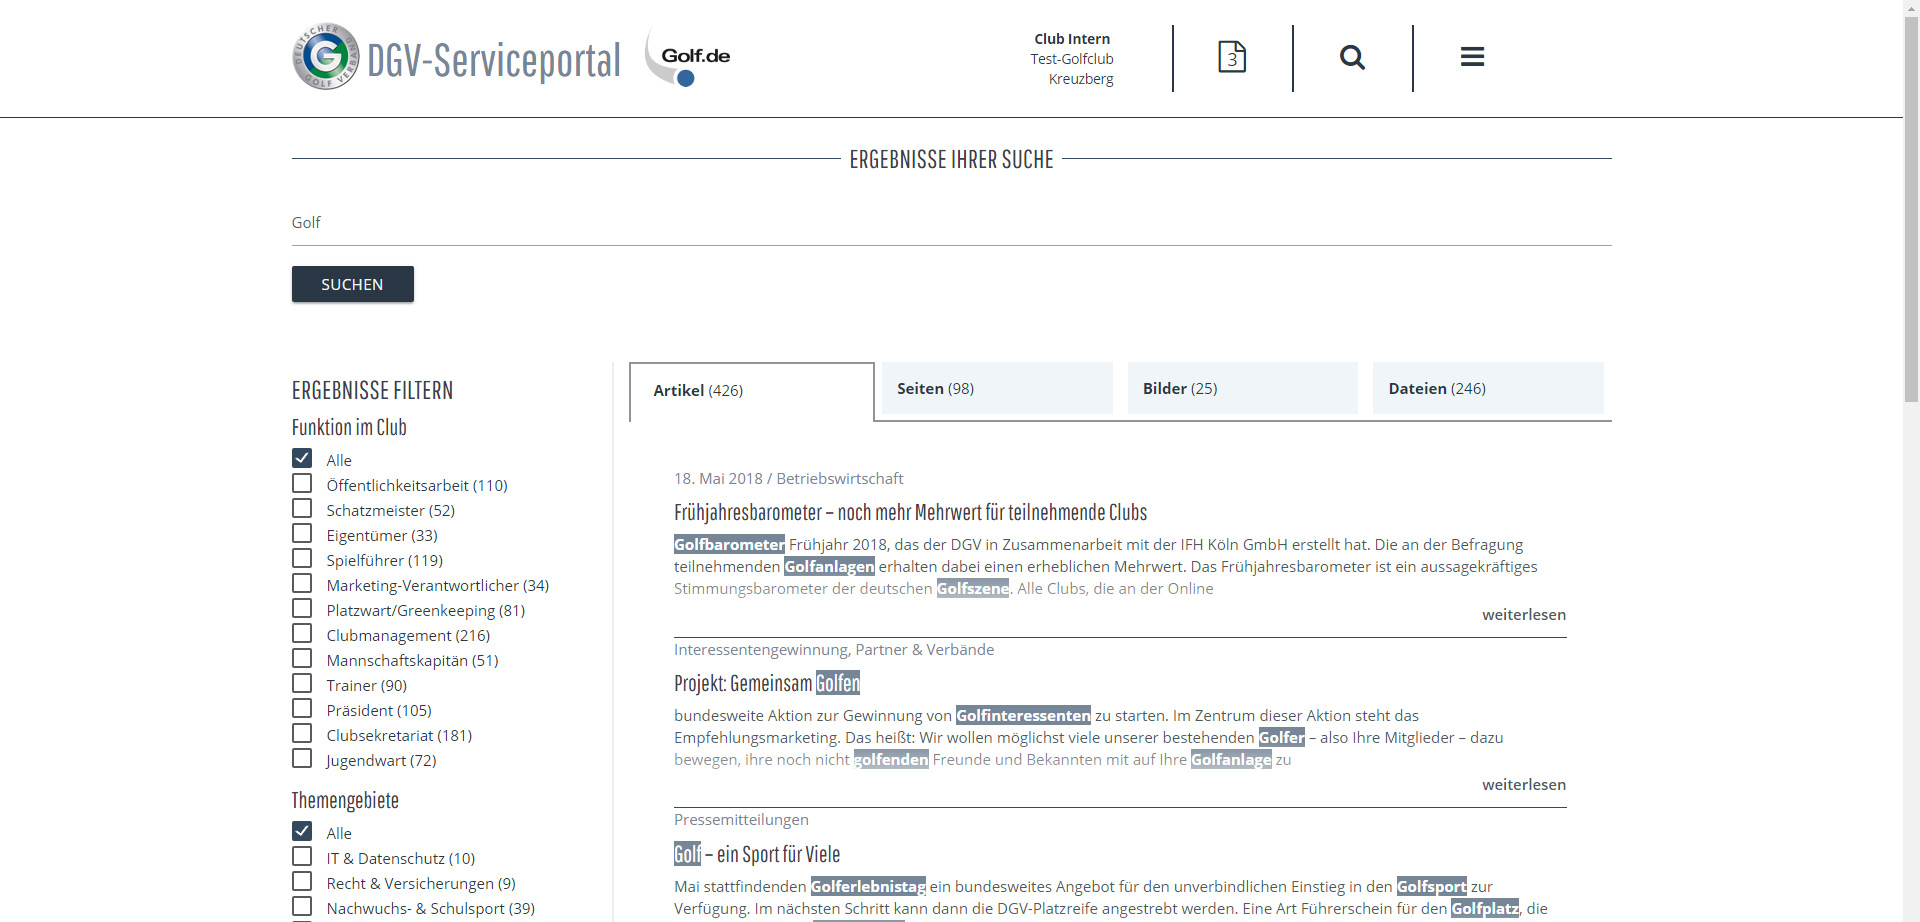 CONTENS Service Portal Faceted Search